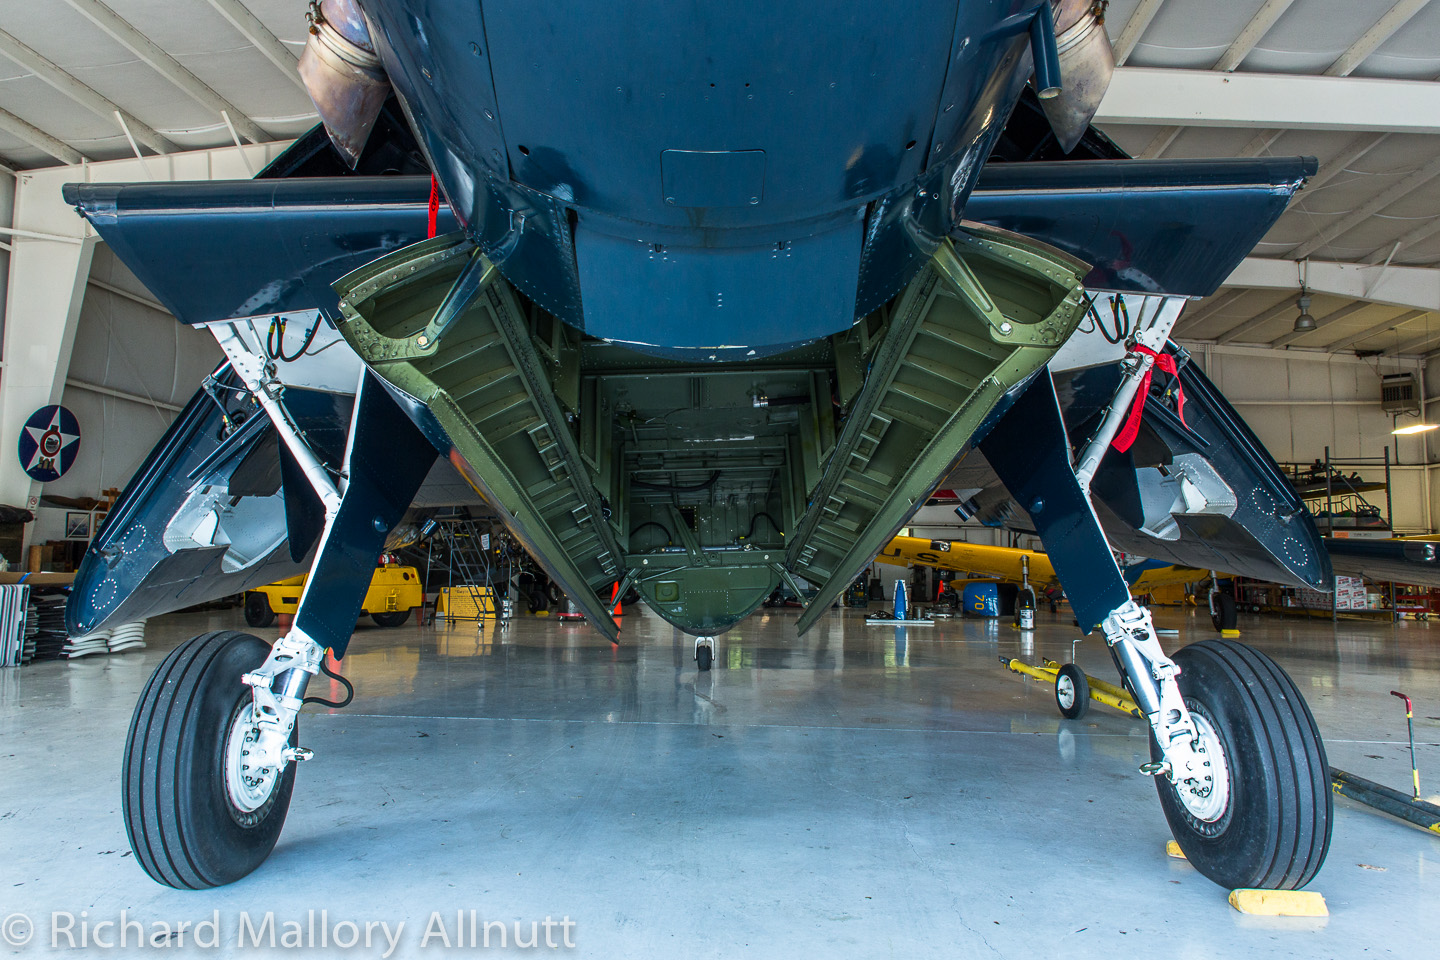 The Avenger's fully rebuilt bomb bay, replacing the hopper from its air-tanker days with Conair, and lastly Forestry Protection Services in Canada. (photo by Richard Mallory Allnutt )